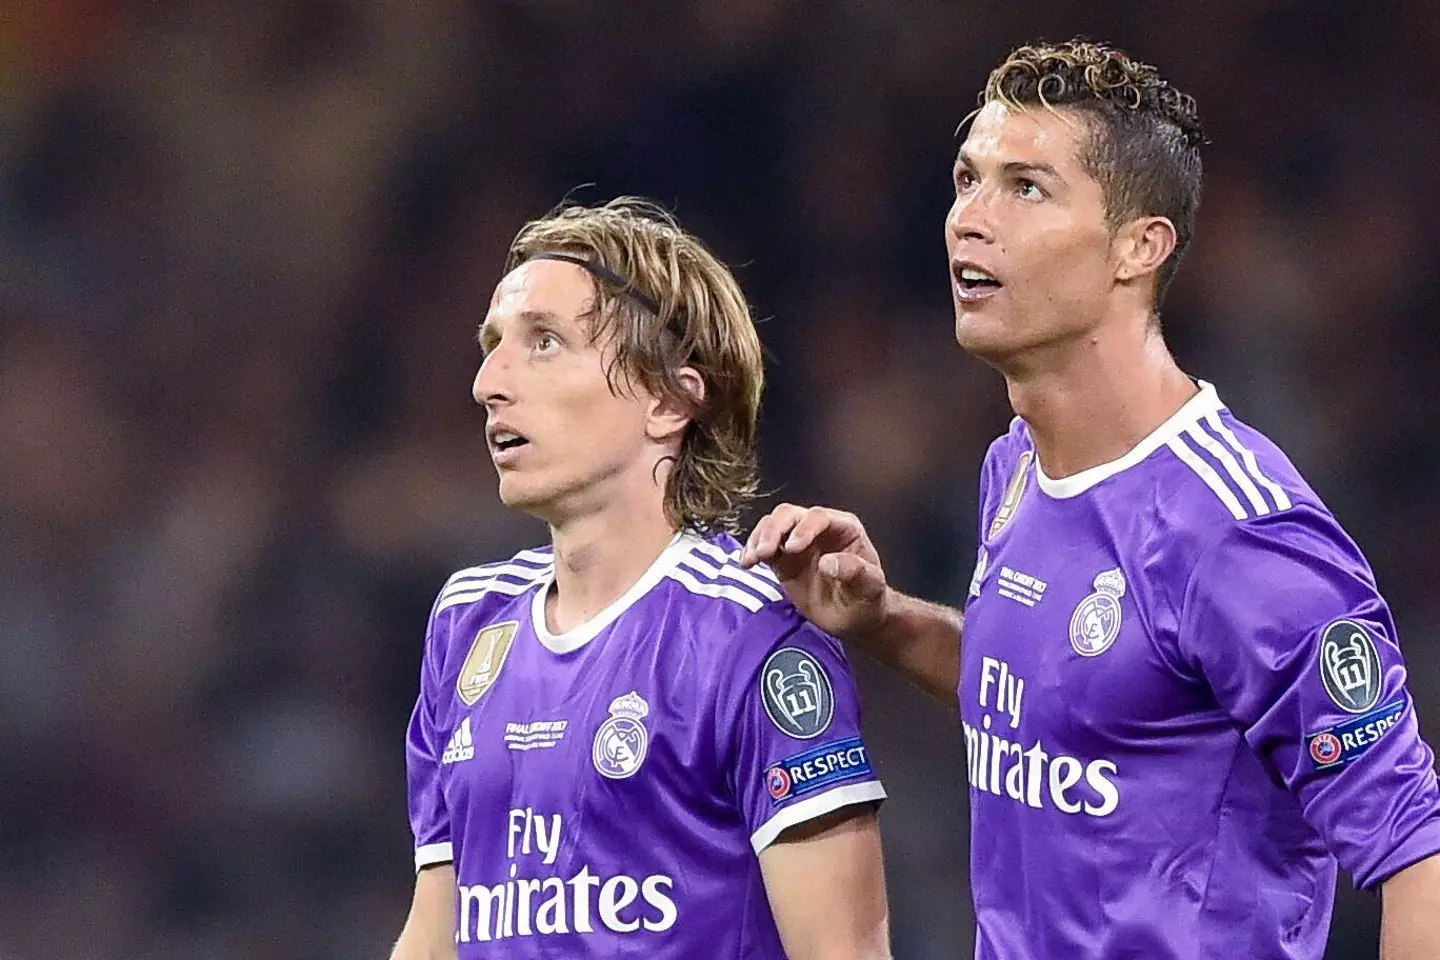 Modric and Ronaldo during their time at Real Madrid. (Image